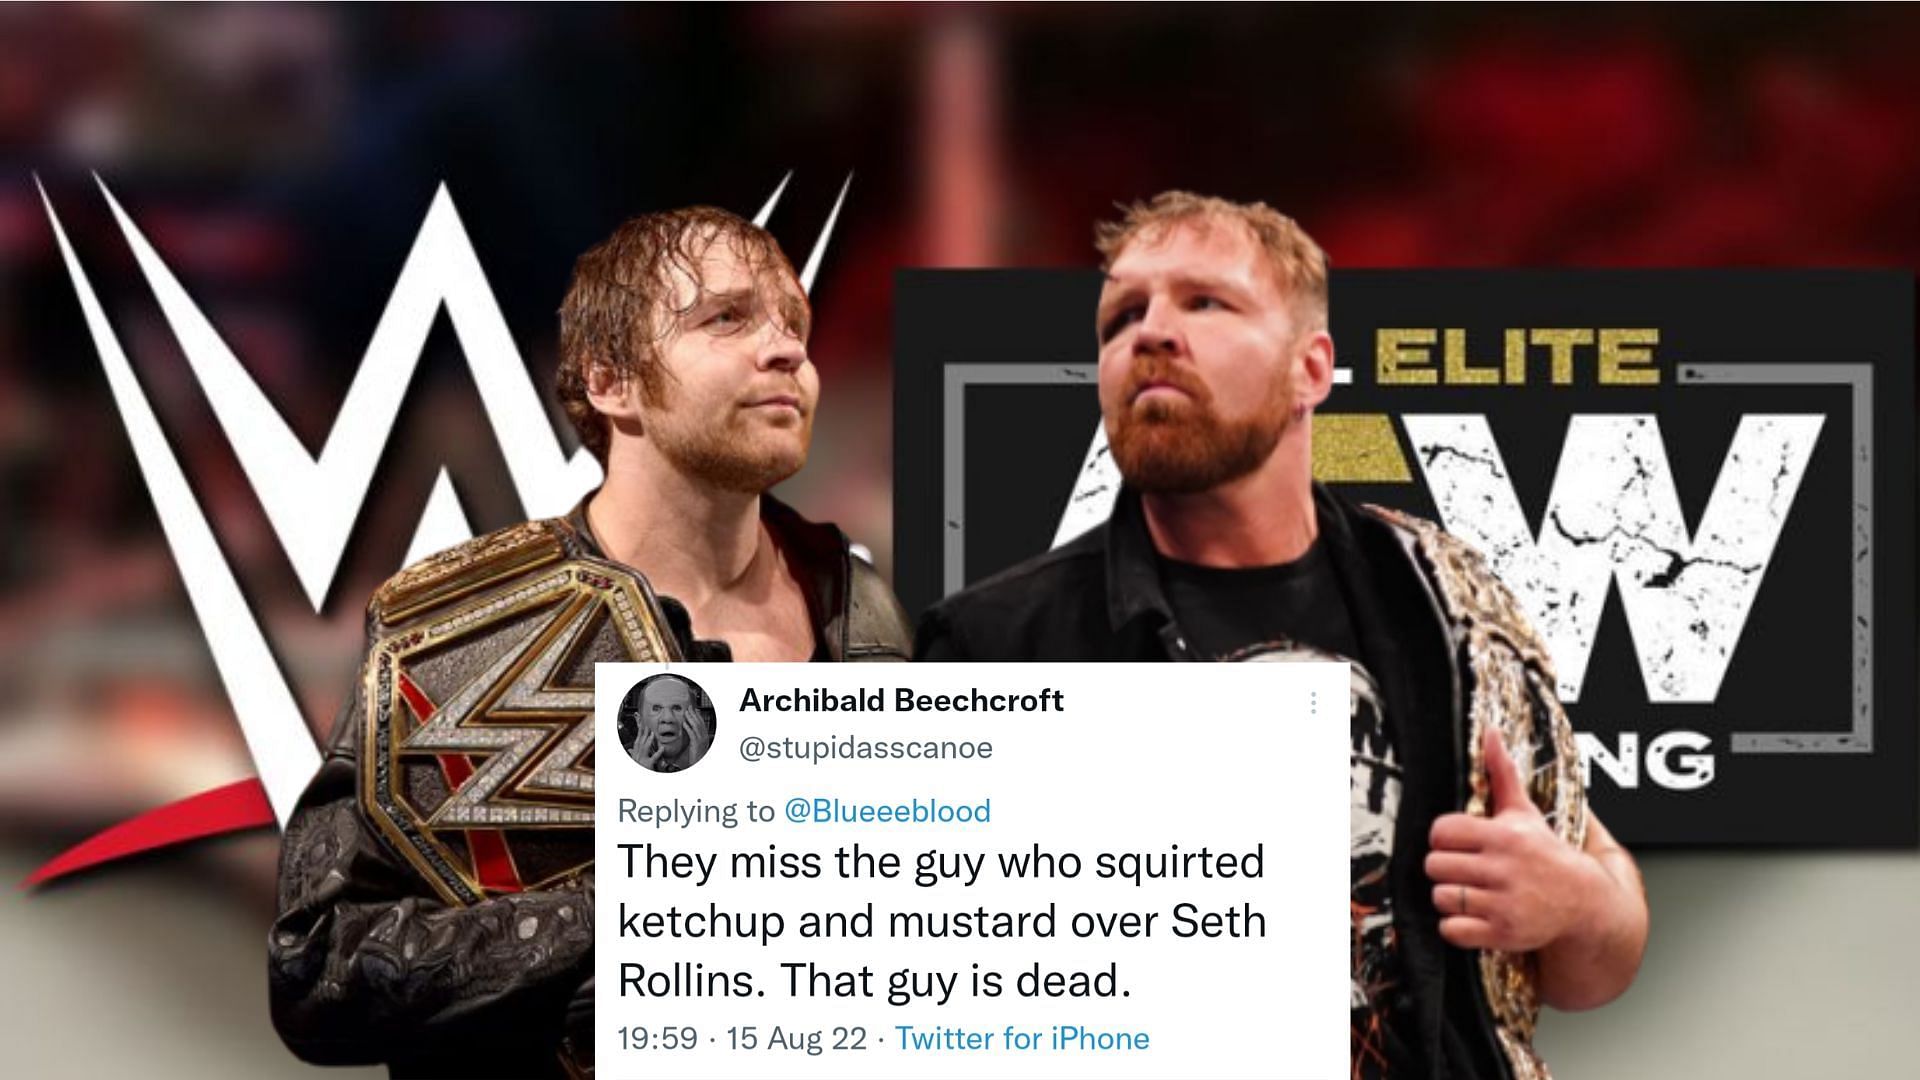 There is an ongoing debate over who is a better persona, Jon Moxley or Dean Ambrose 